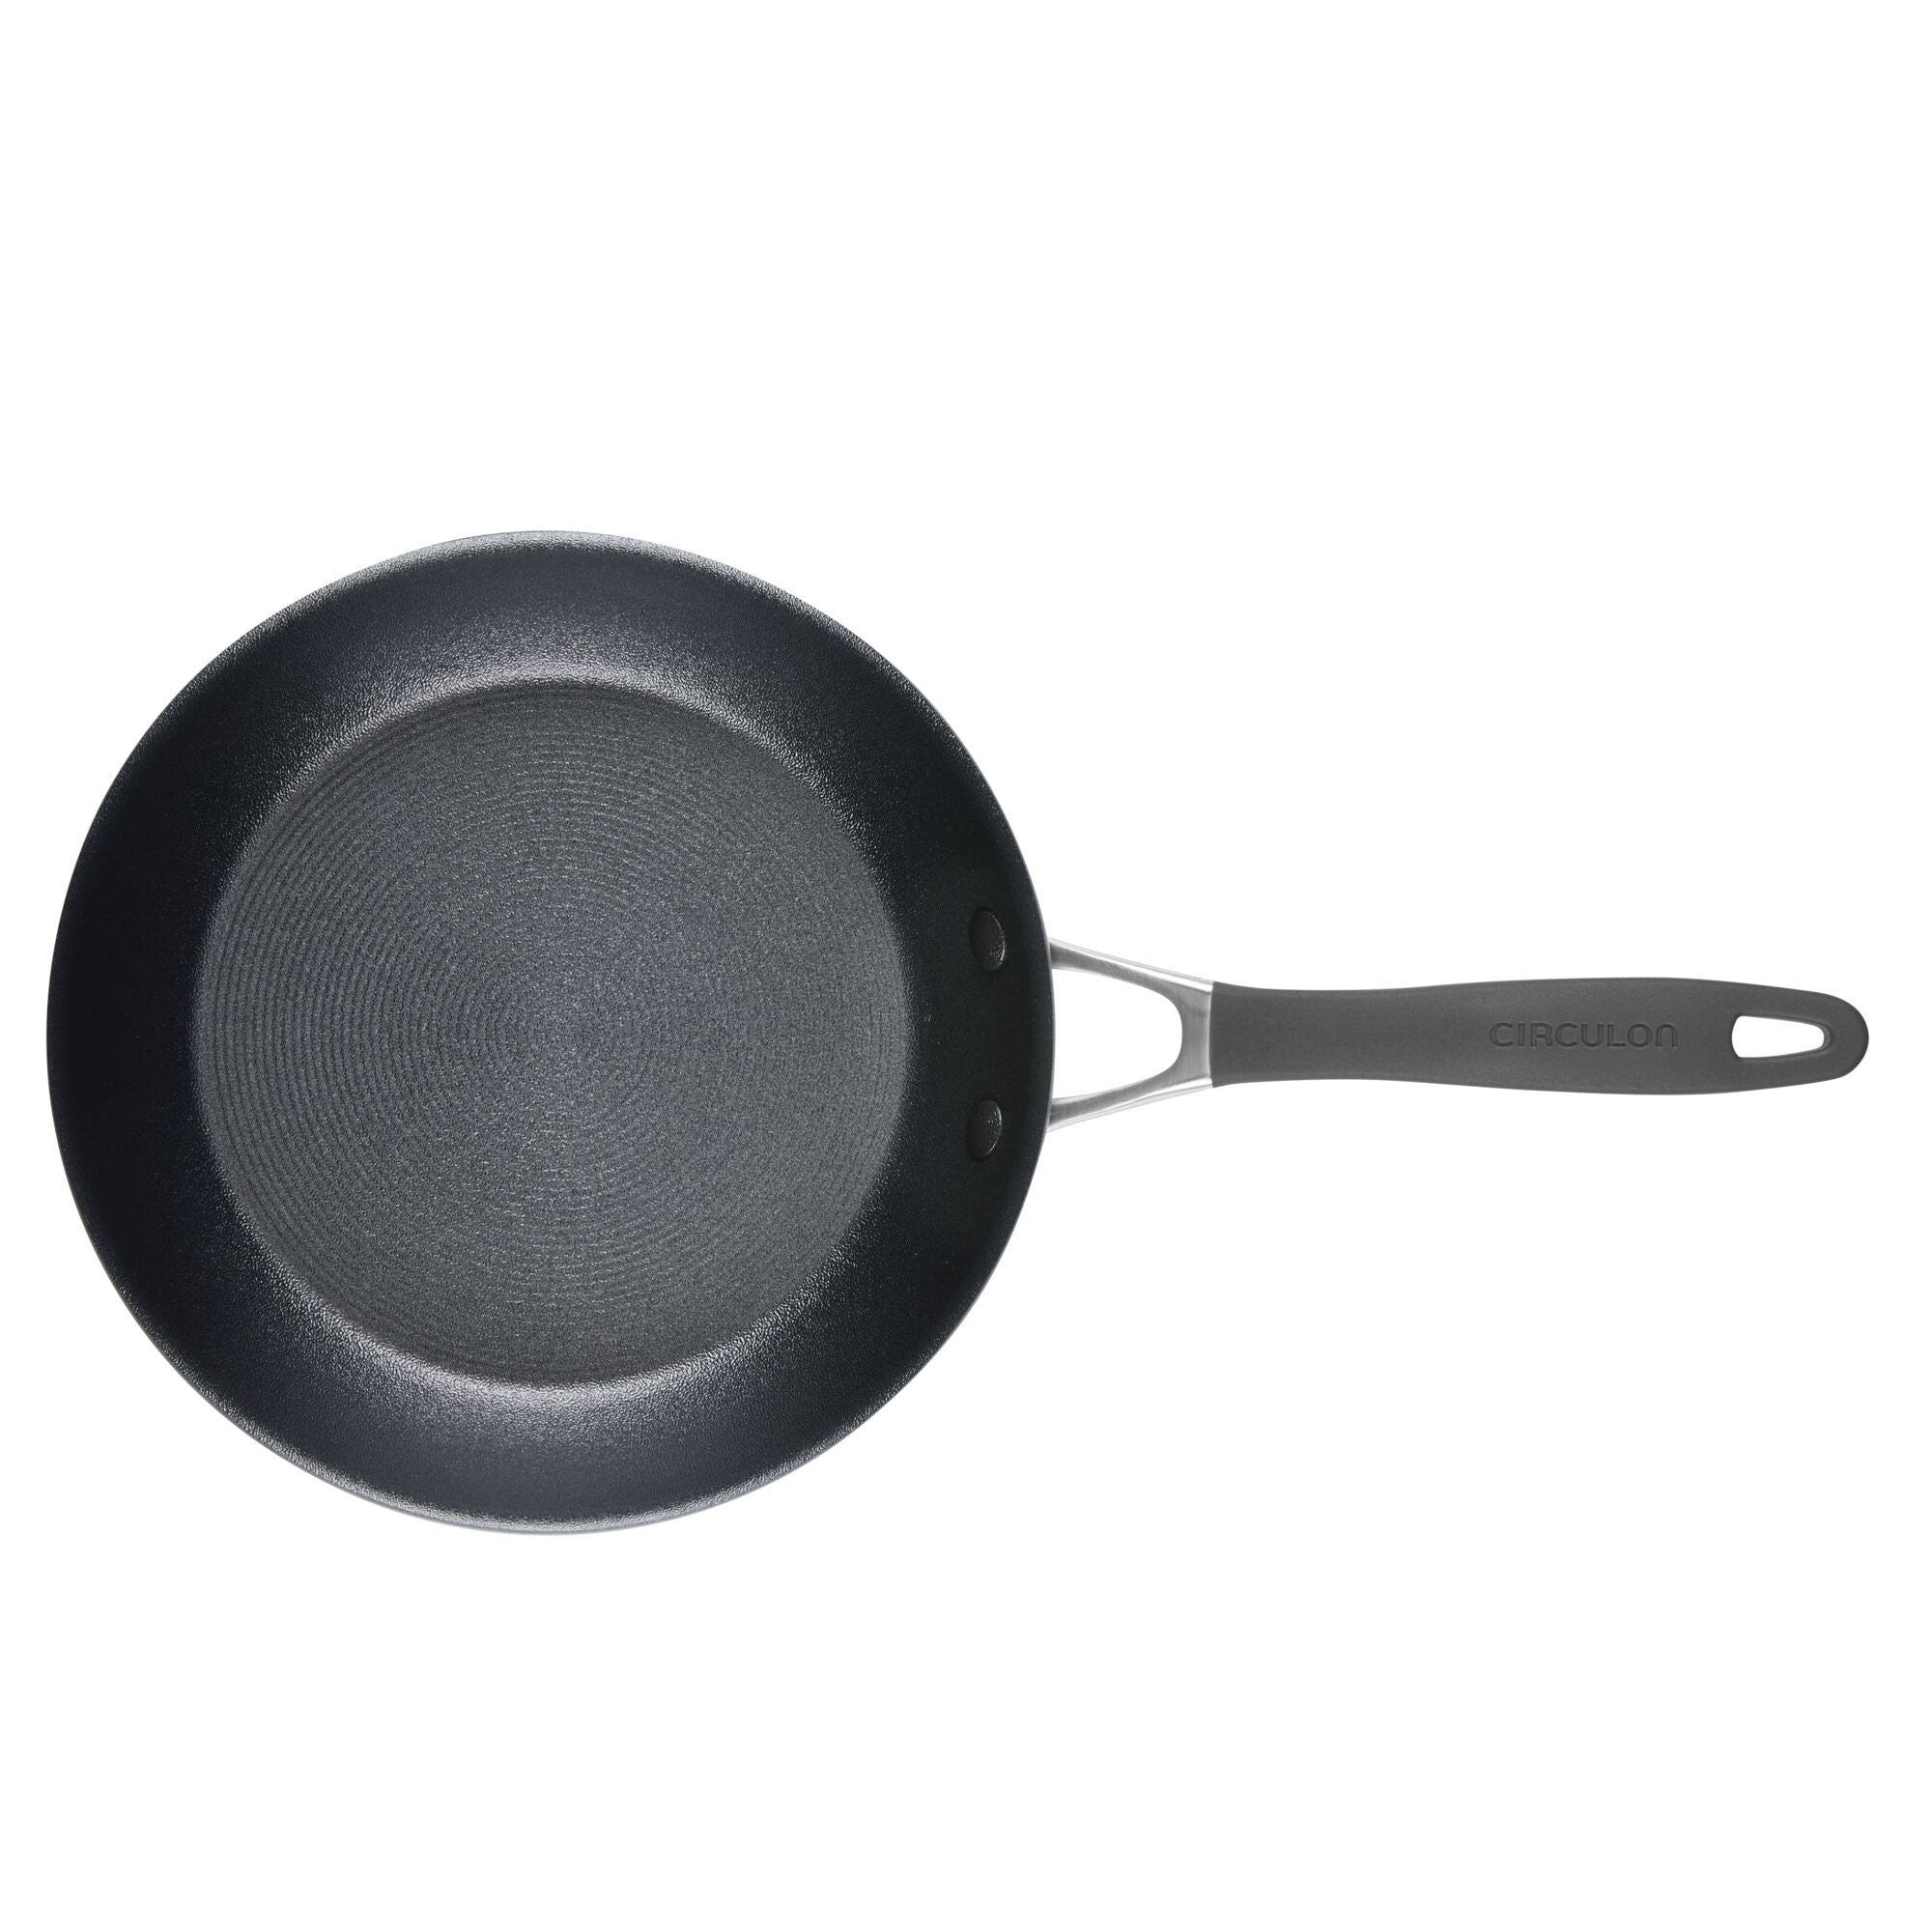 Circulon A1 Series with ScratchDefense Technology Nonstick Induction Frying  Pans/Skillet Set, 8.5 Inch and 10 Inch - Graphite, Skillet Set (8.5 